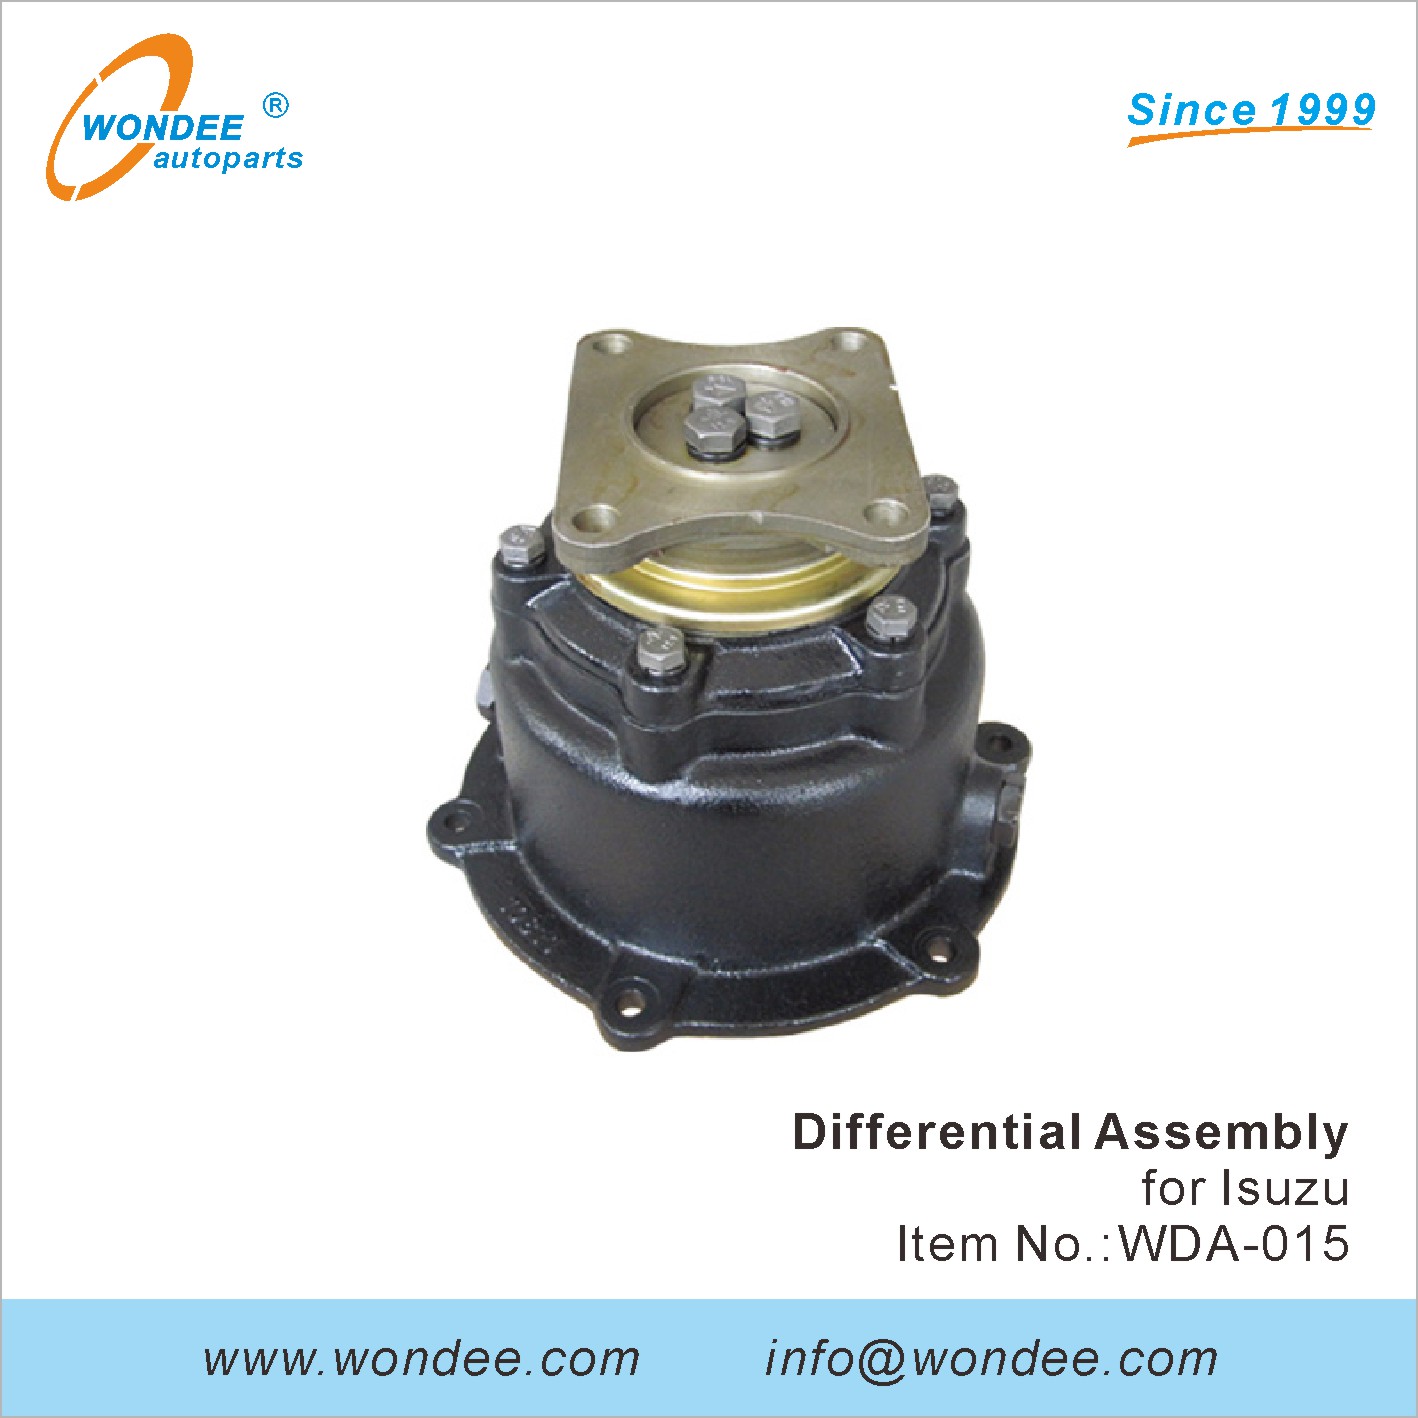 WONDEE differential assembly (15)